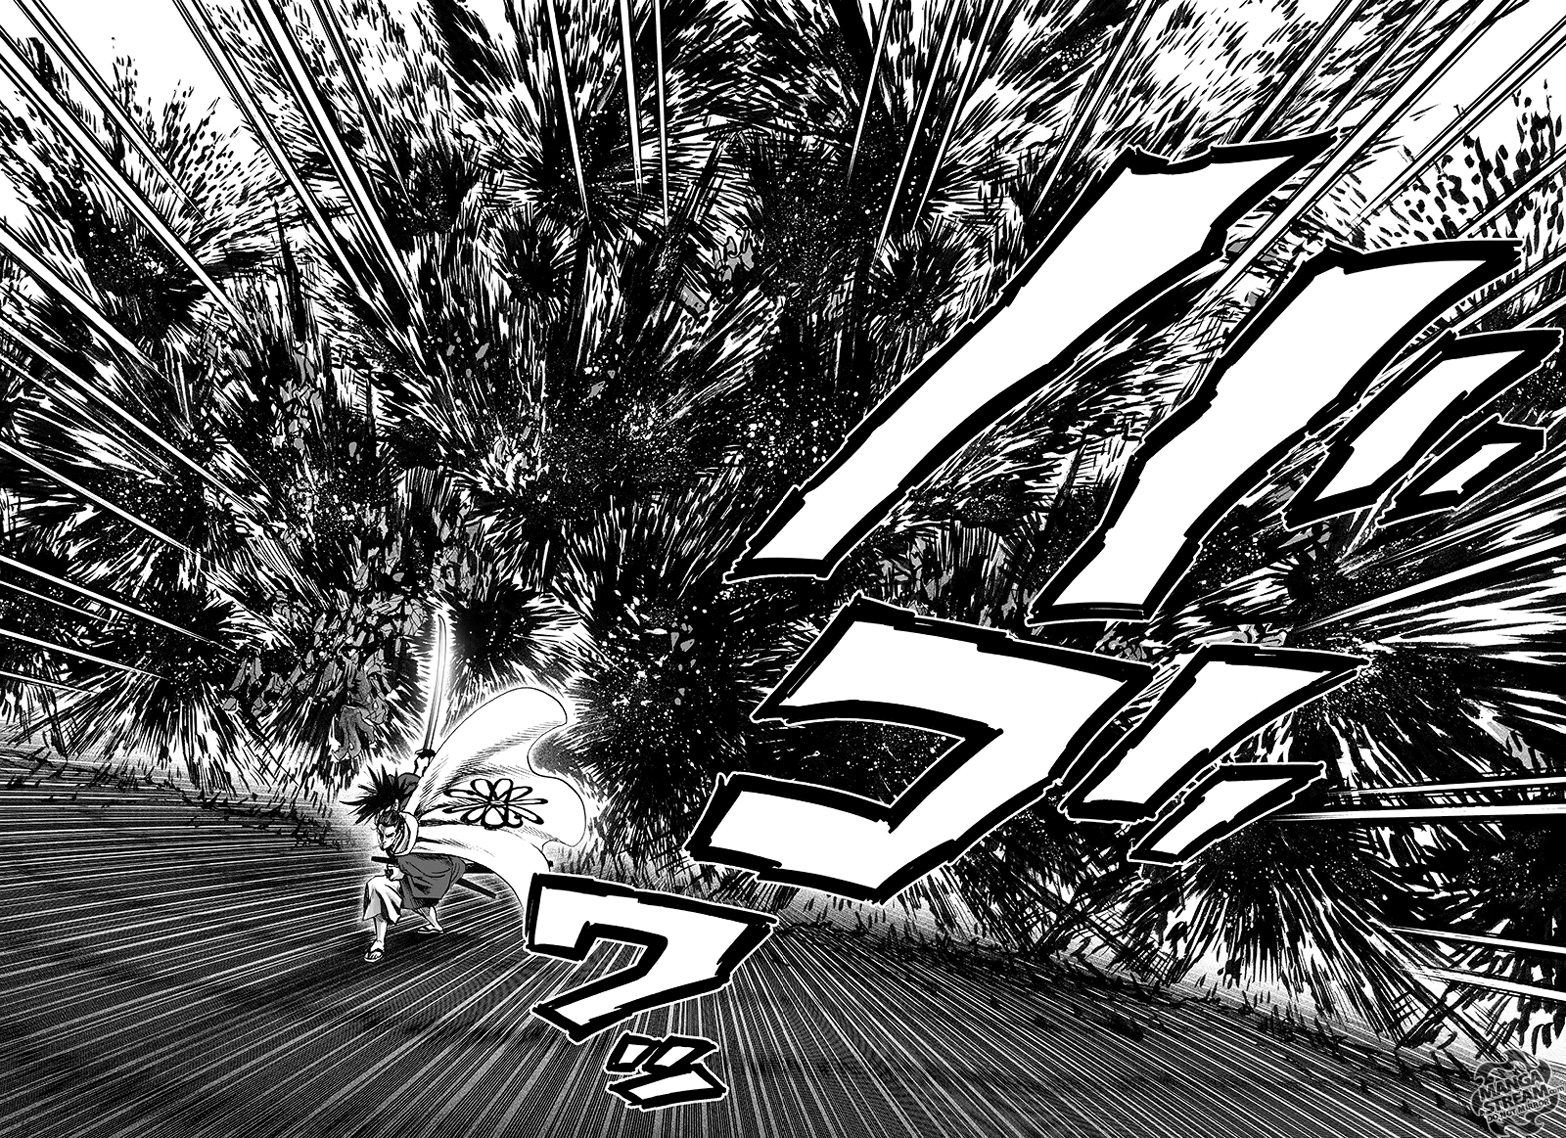 One Punch Man, Chapter 94 - I See image 125